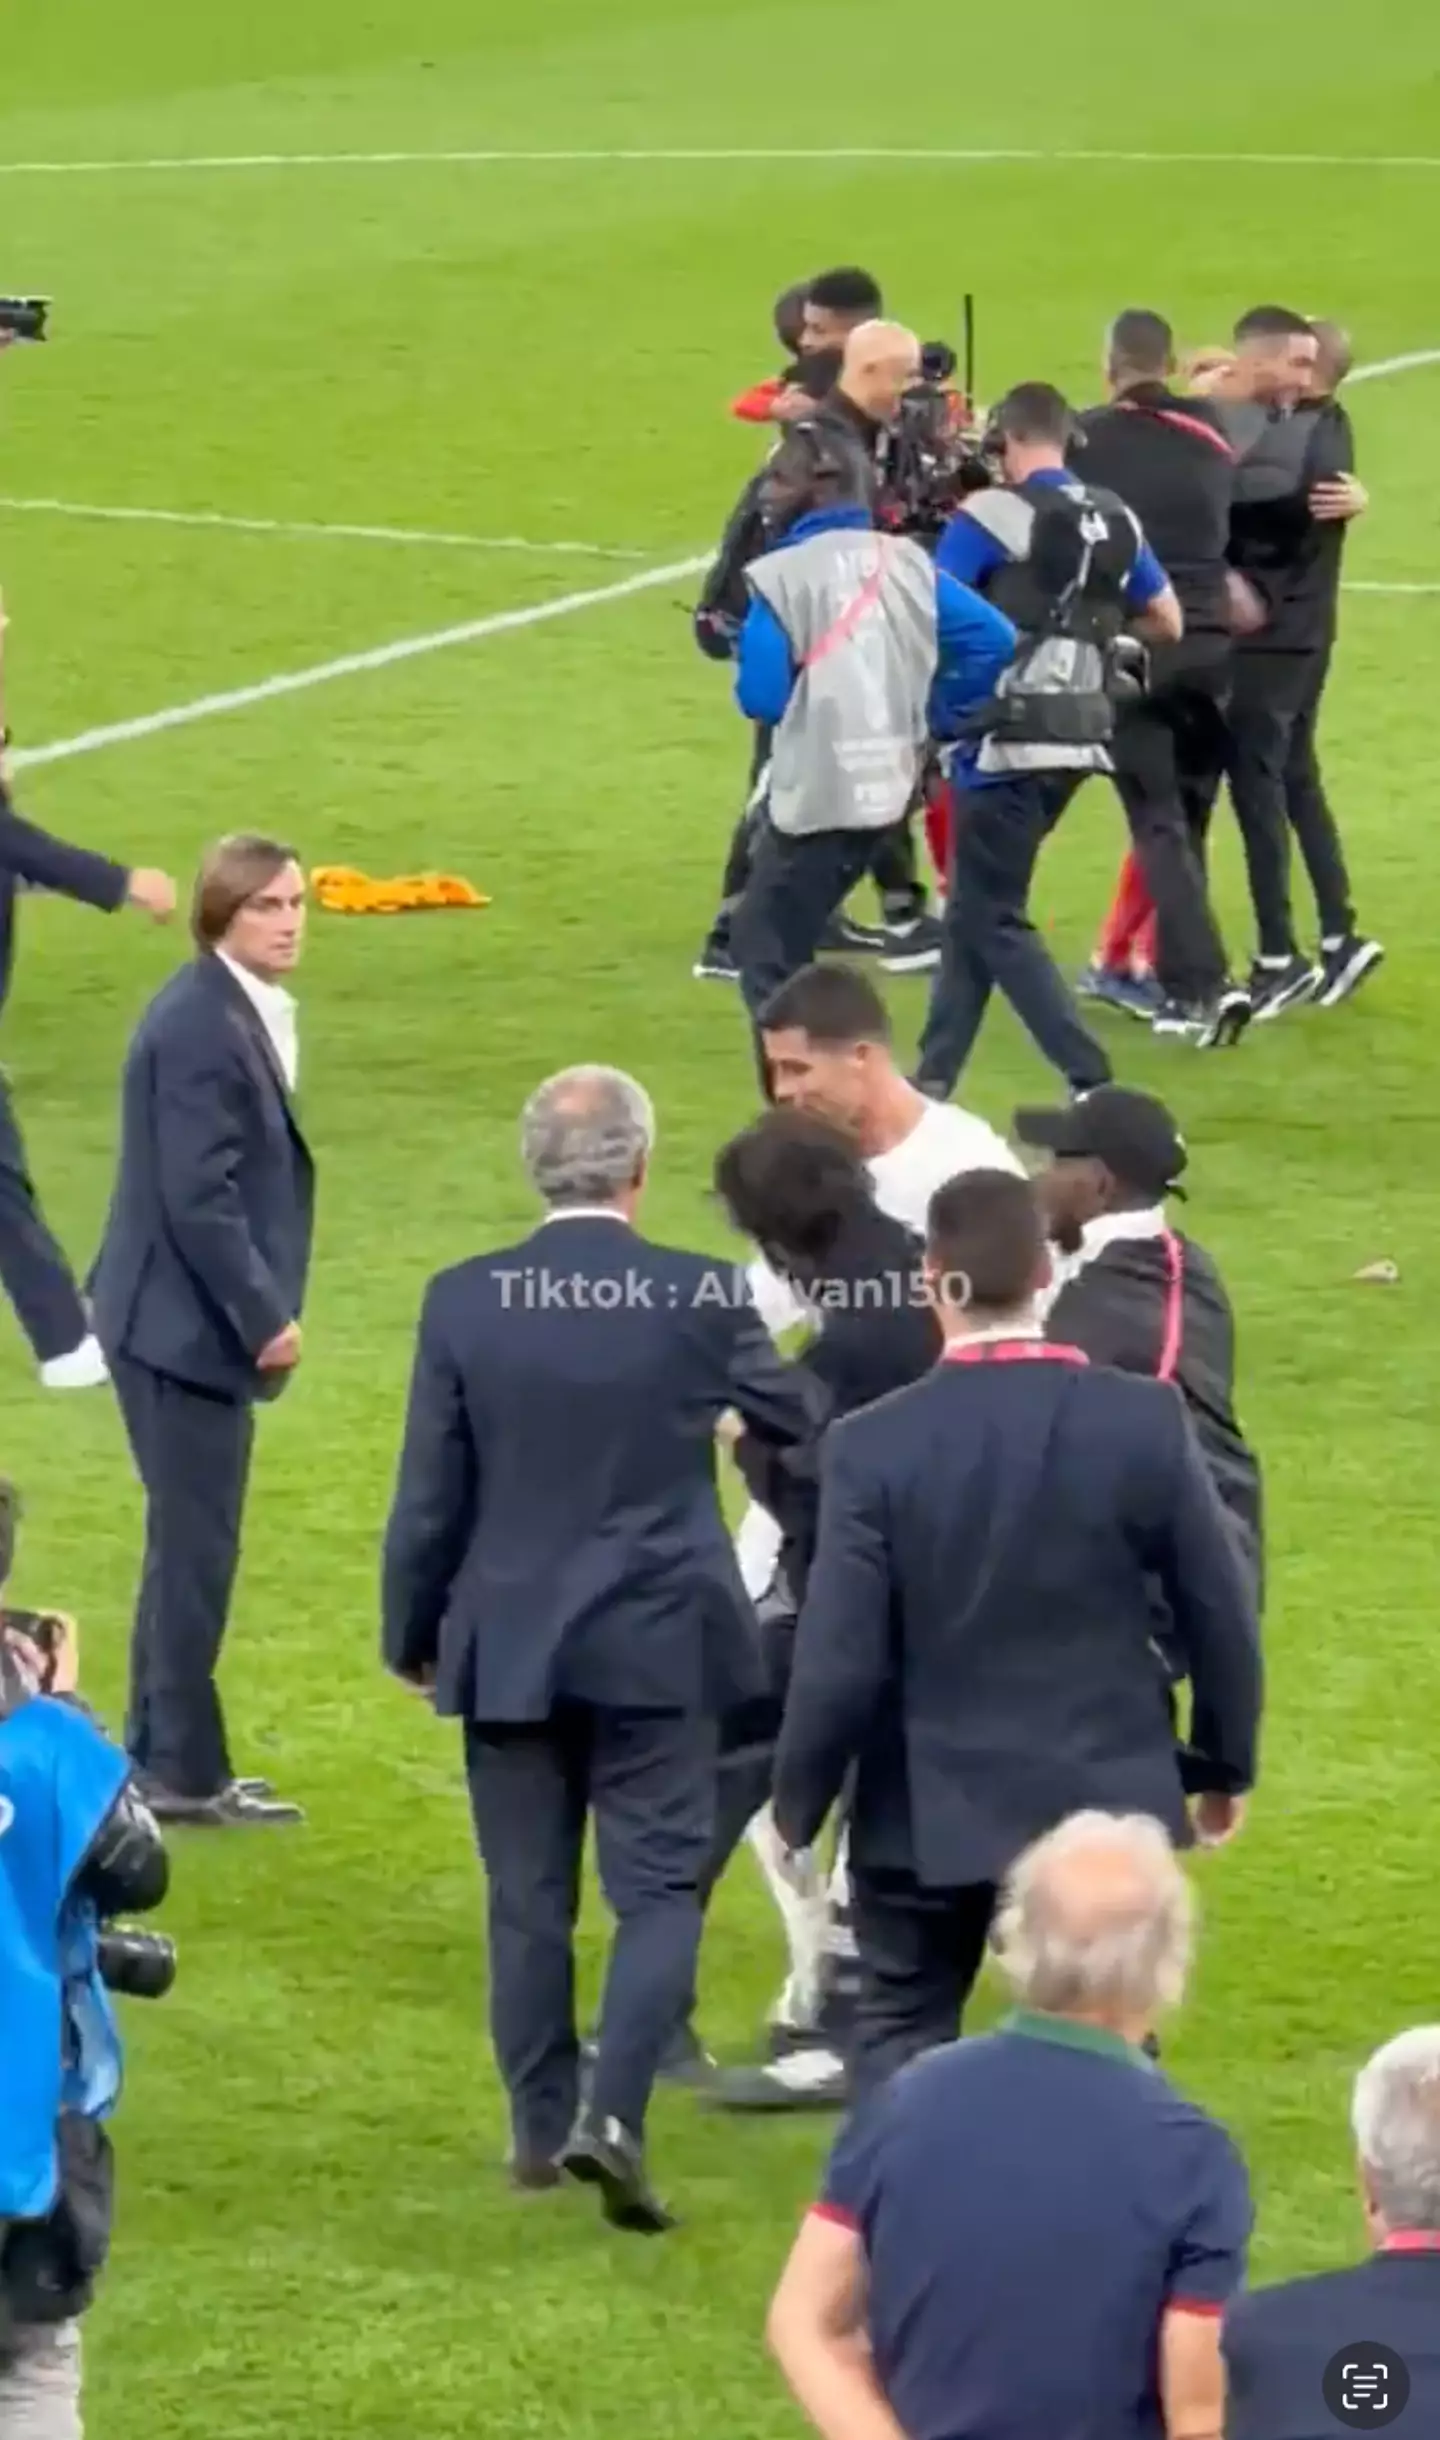 Security immediately intervened when the fan tried to approach Portugal captain Cristiano Ronaldo.